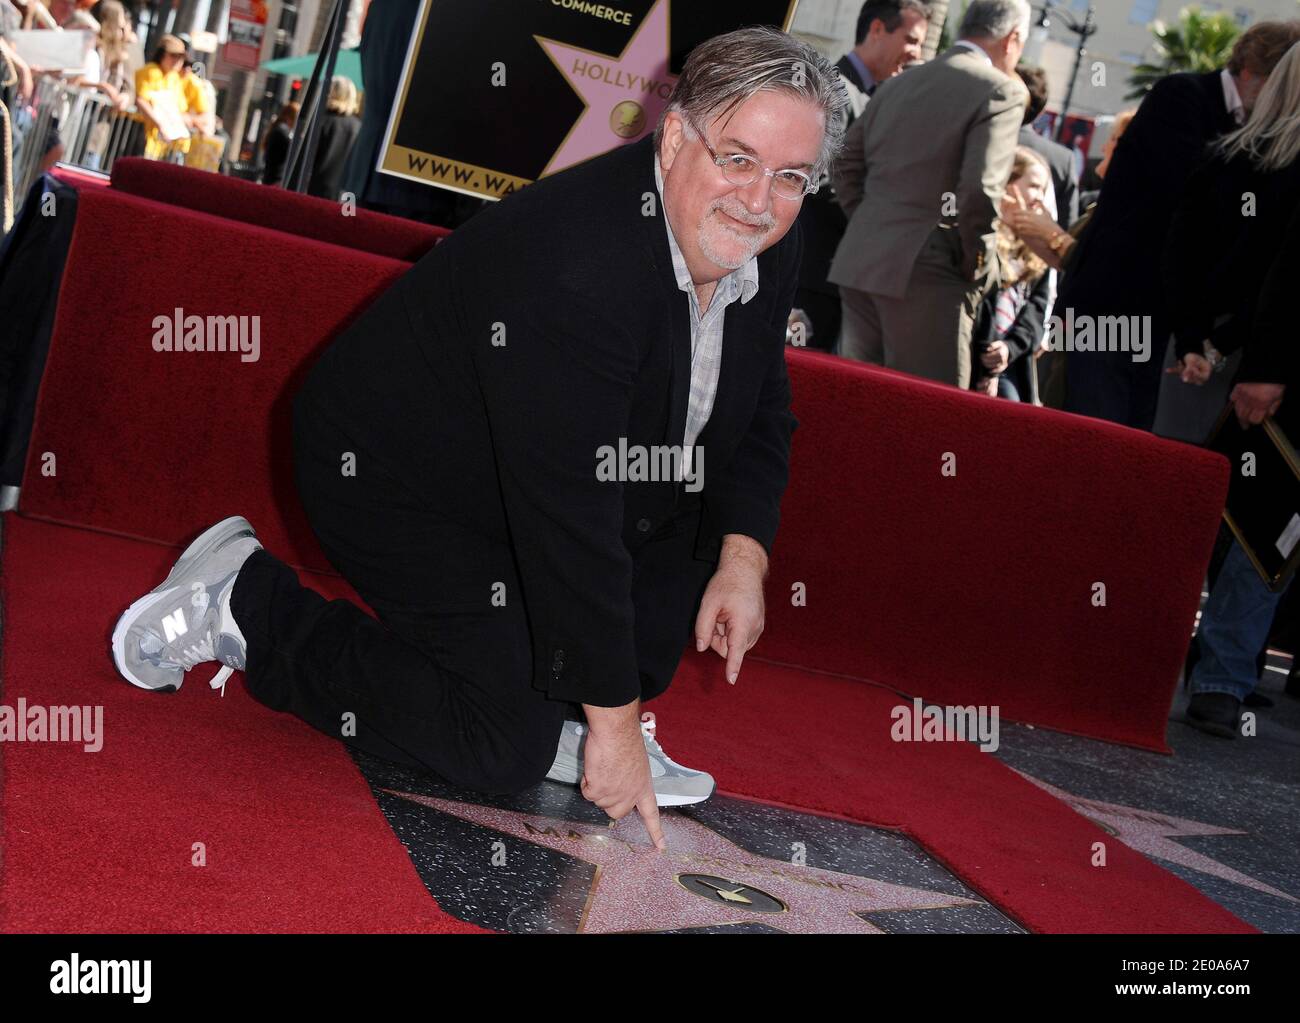 'The Simpsons' creator Matt Groening is honored with a Star on the Hollywood Walk of Fame. Los Angeles, CA, USA February 14, 2012. Photo by Lionel Hahn/ABACAPRESS.COM Stock Photo